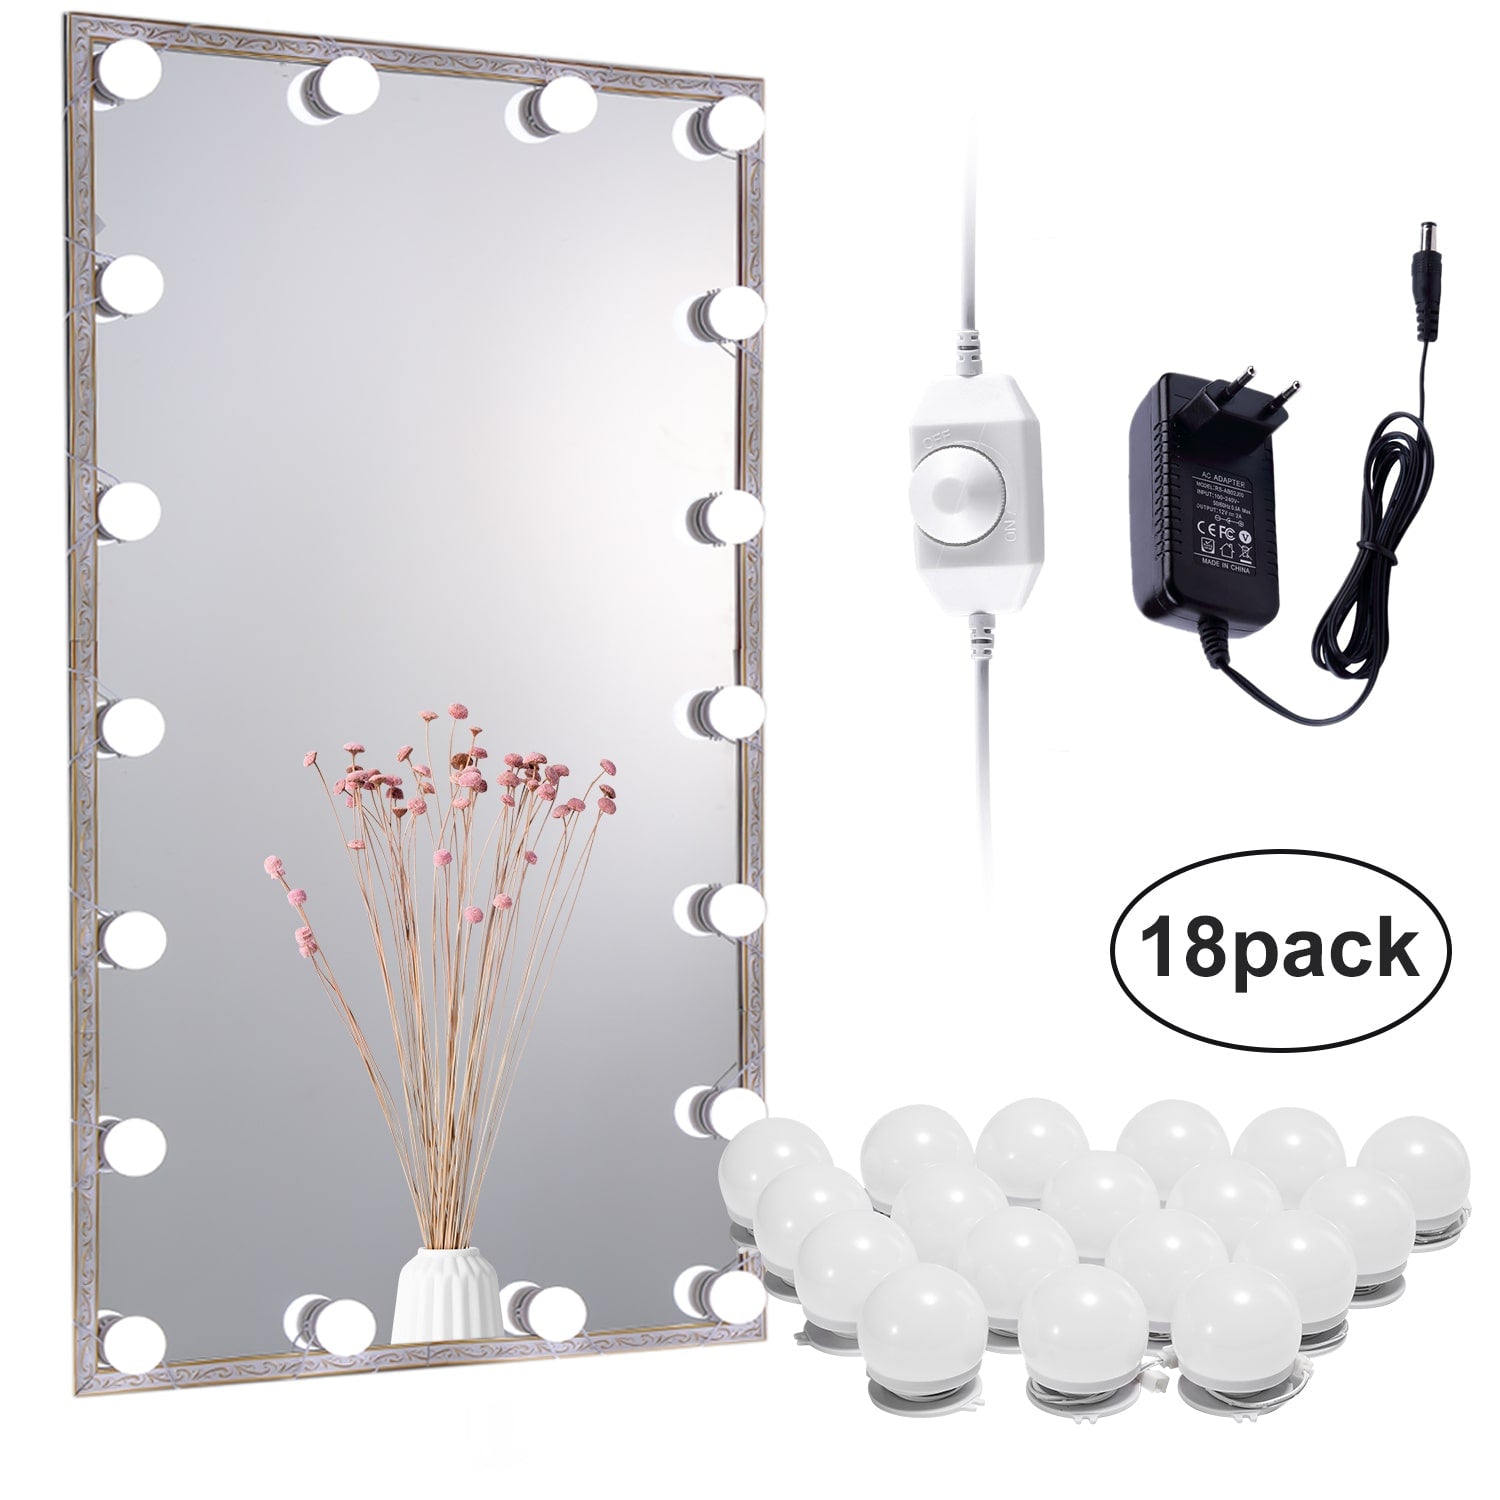 Ylued Vanity Mirror with Lights, Hollywood LED Makeup Mirror with 11  Dimmable Bulbs, Lighted Makeup Mirror for Desk, Light Up Mirror 23 W x 18  H